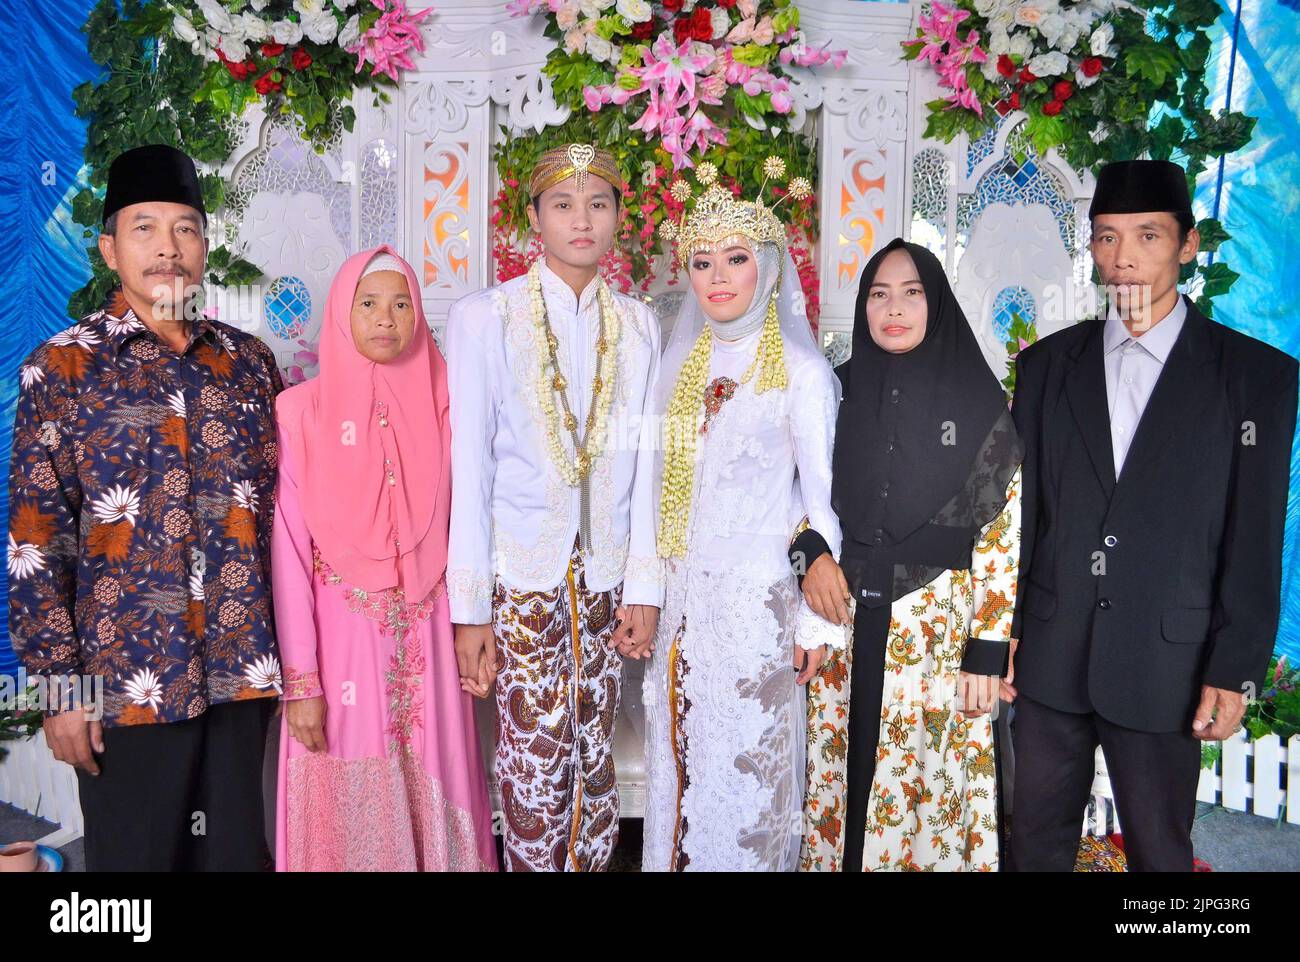 Tegal, INDONESIA - July 19, 2020: The bride and groom with their families. Stock Photo